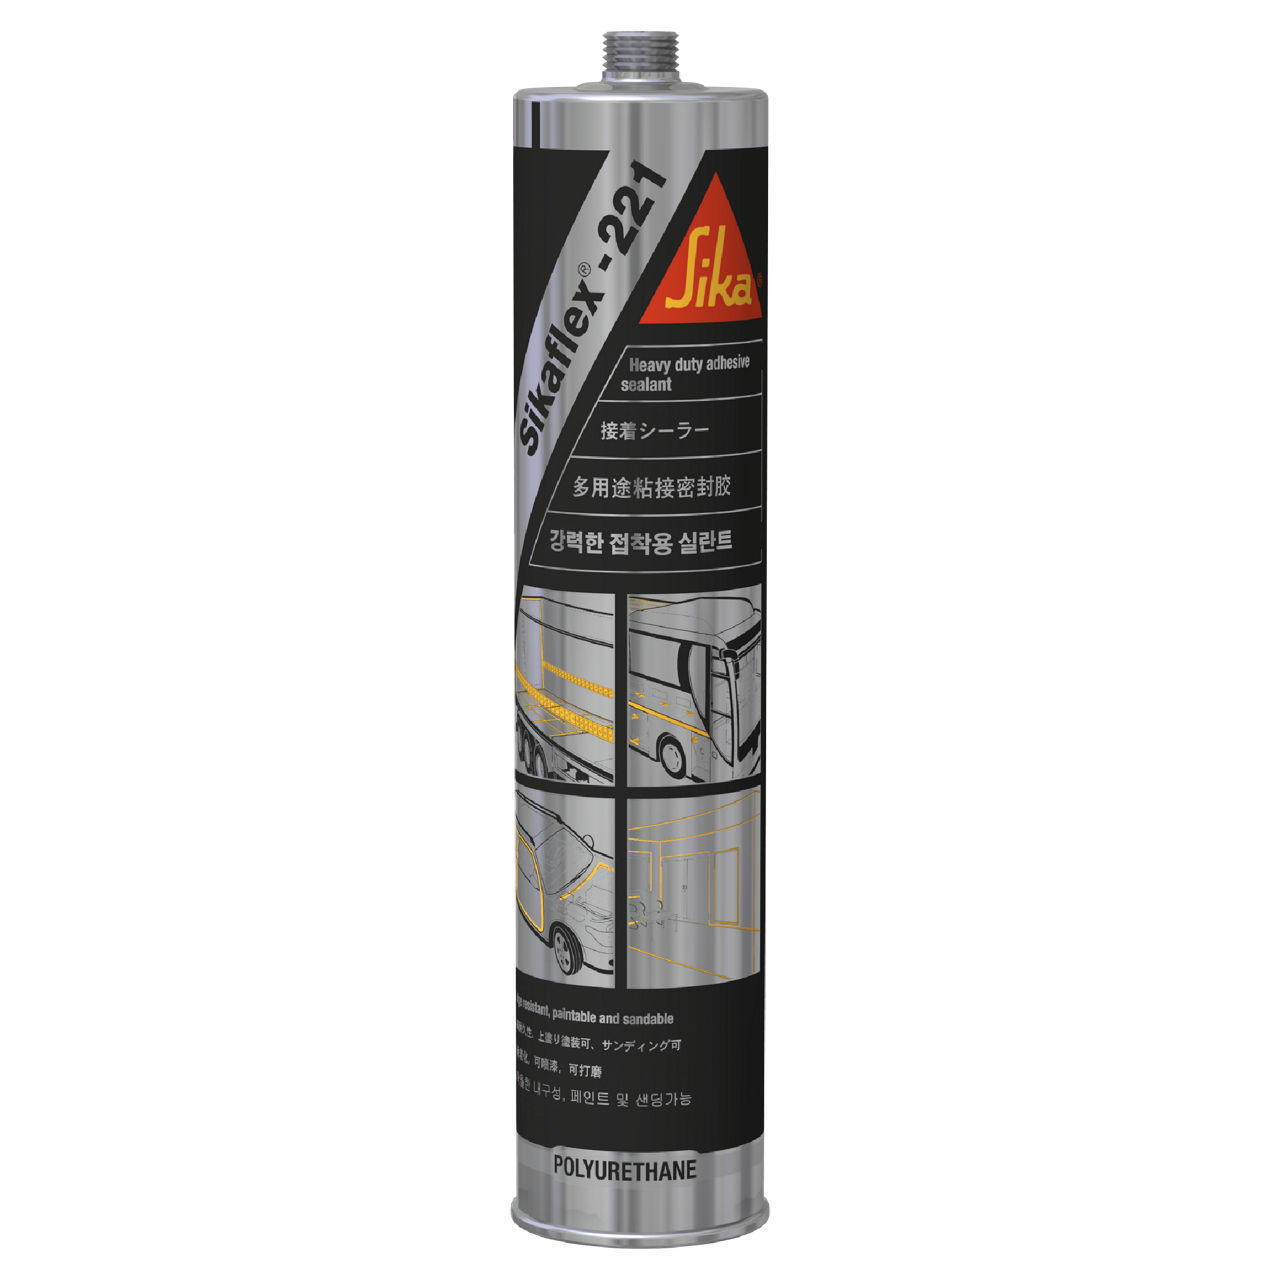 How to use High Quality Sikaflex 221 Sealant for Joints 